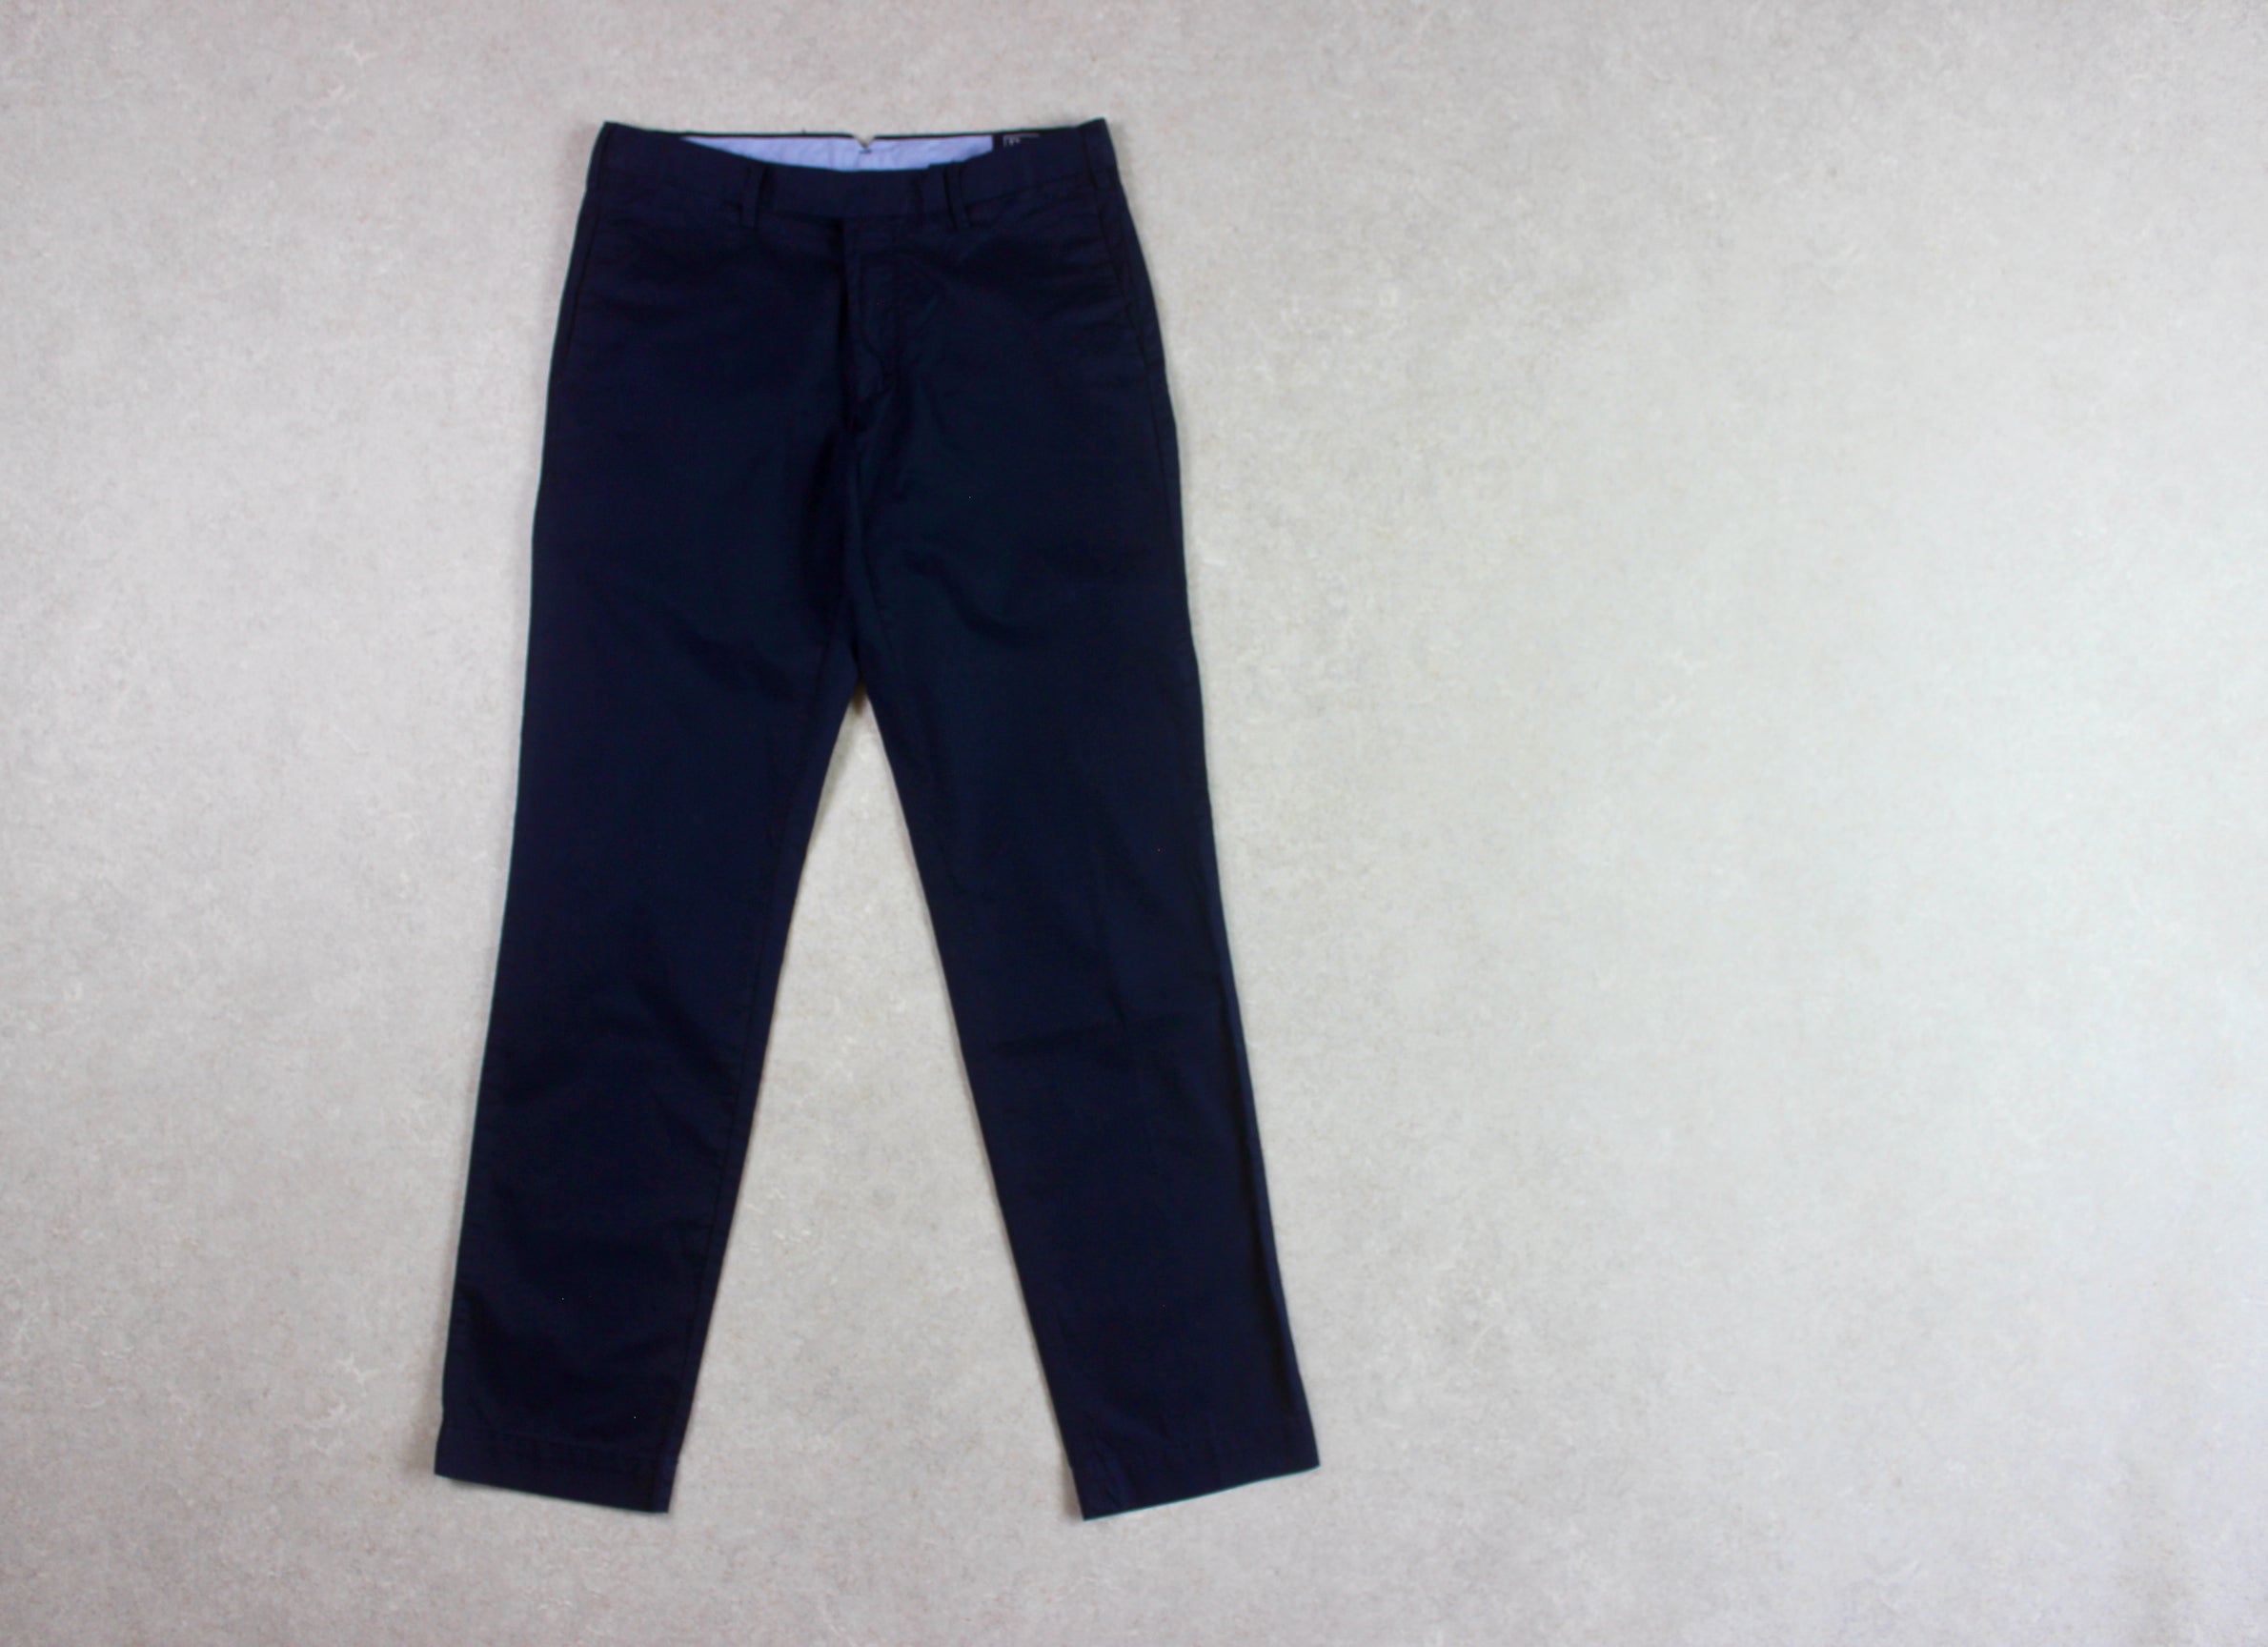 Polo Ralph Lauren - Slim Fit Chino Trousers - Navy Blue - 30/32